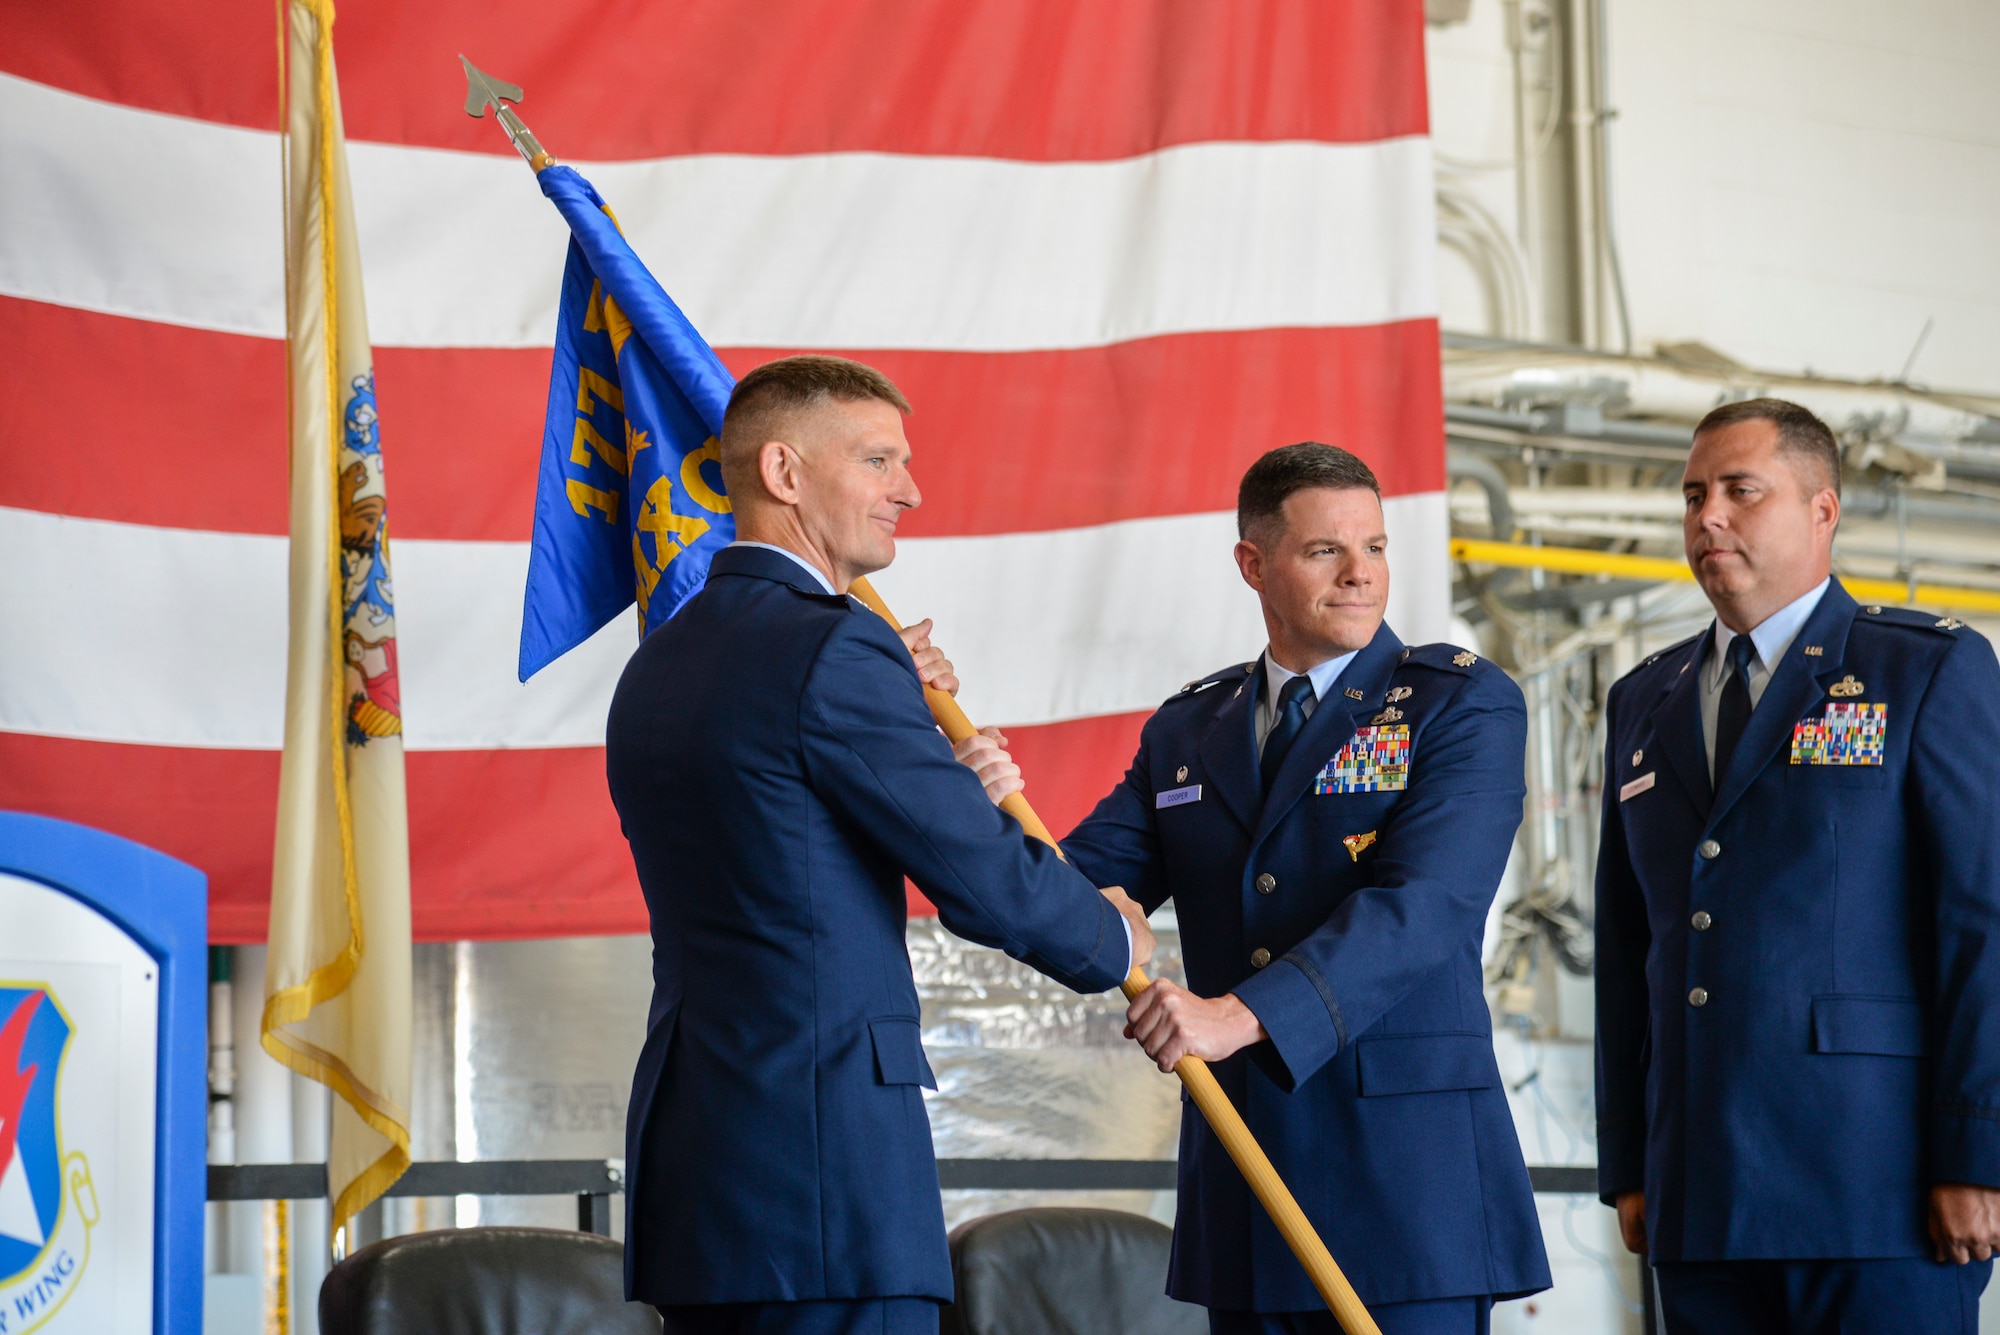 Col. Derek B. Routt passes the 177th Maintenance Group's guideon to Lt. Col. Brian Cooper